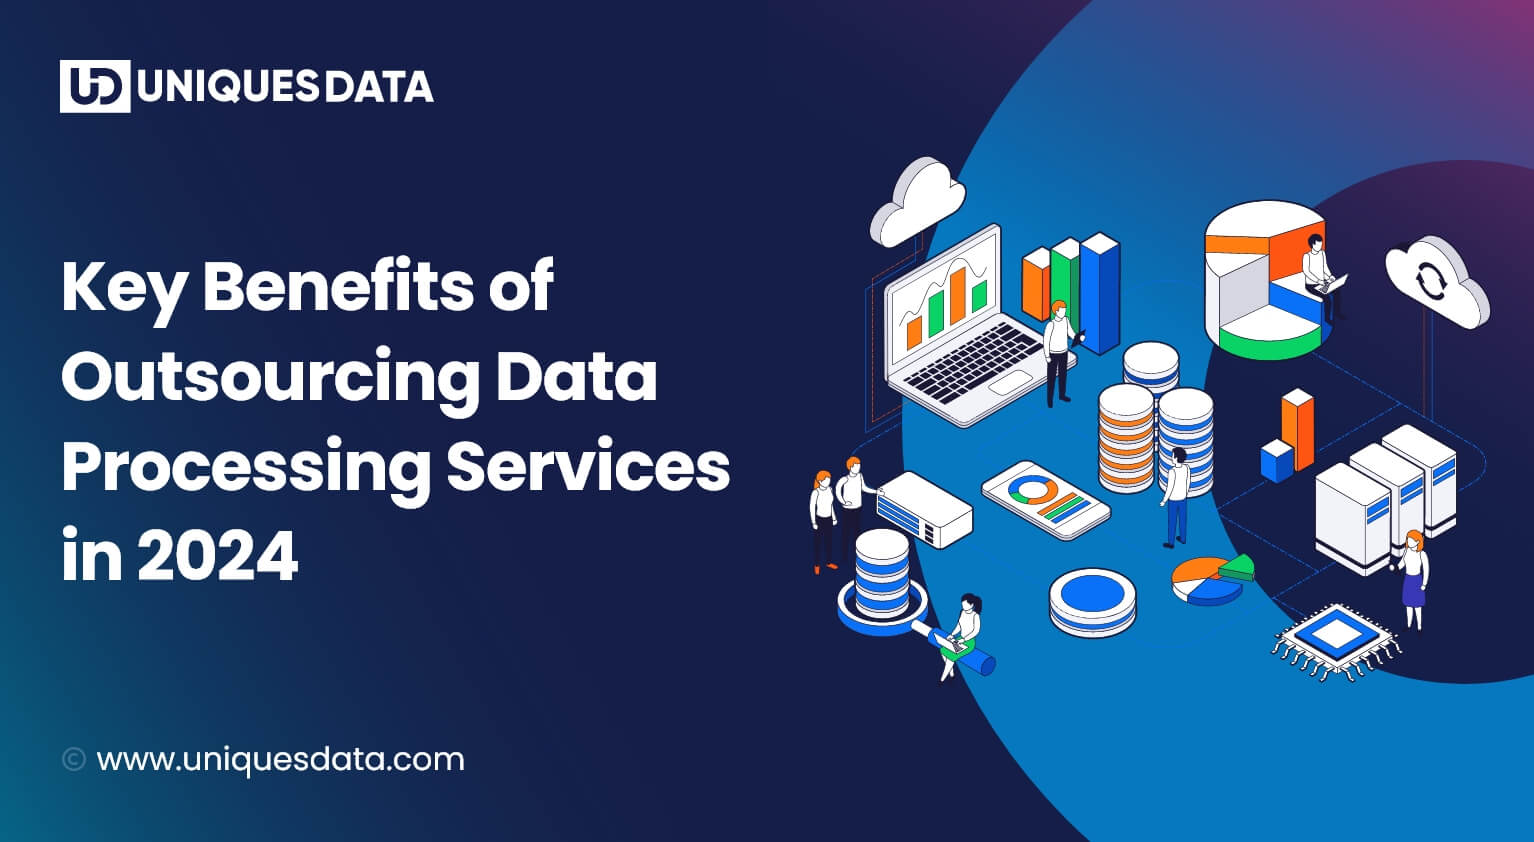 Key Benefits of Outsourcing Data Processing Services in 2024